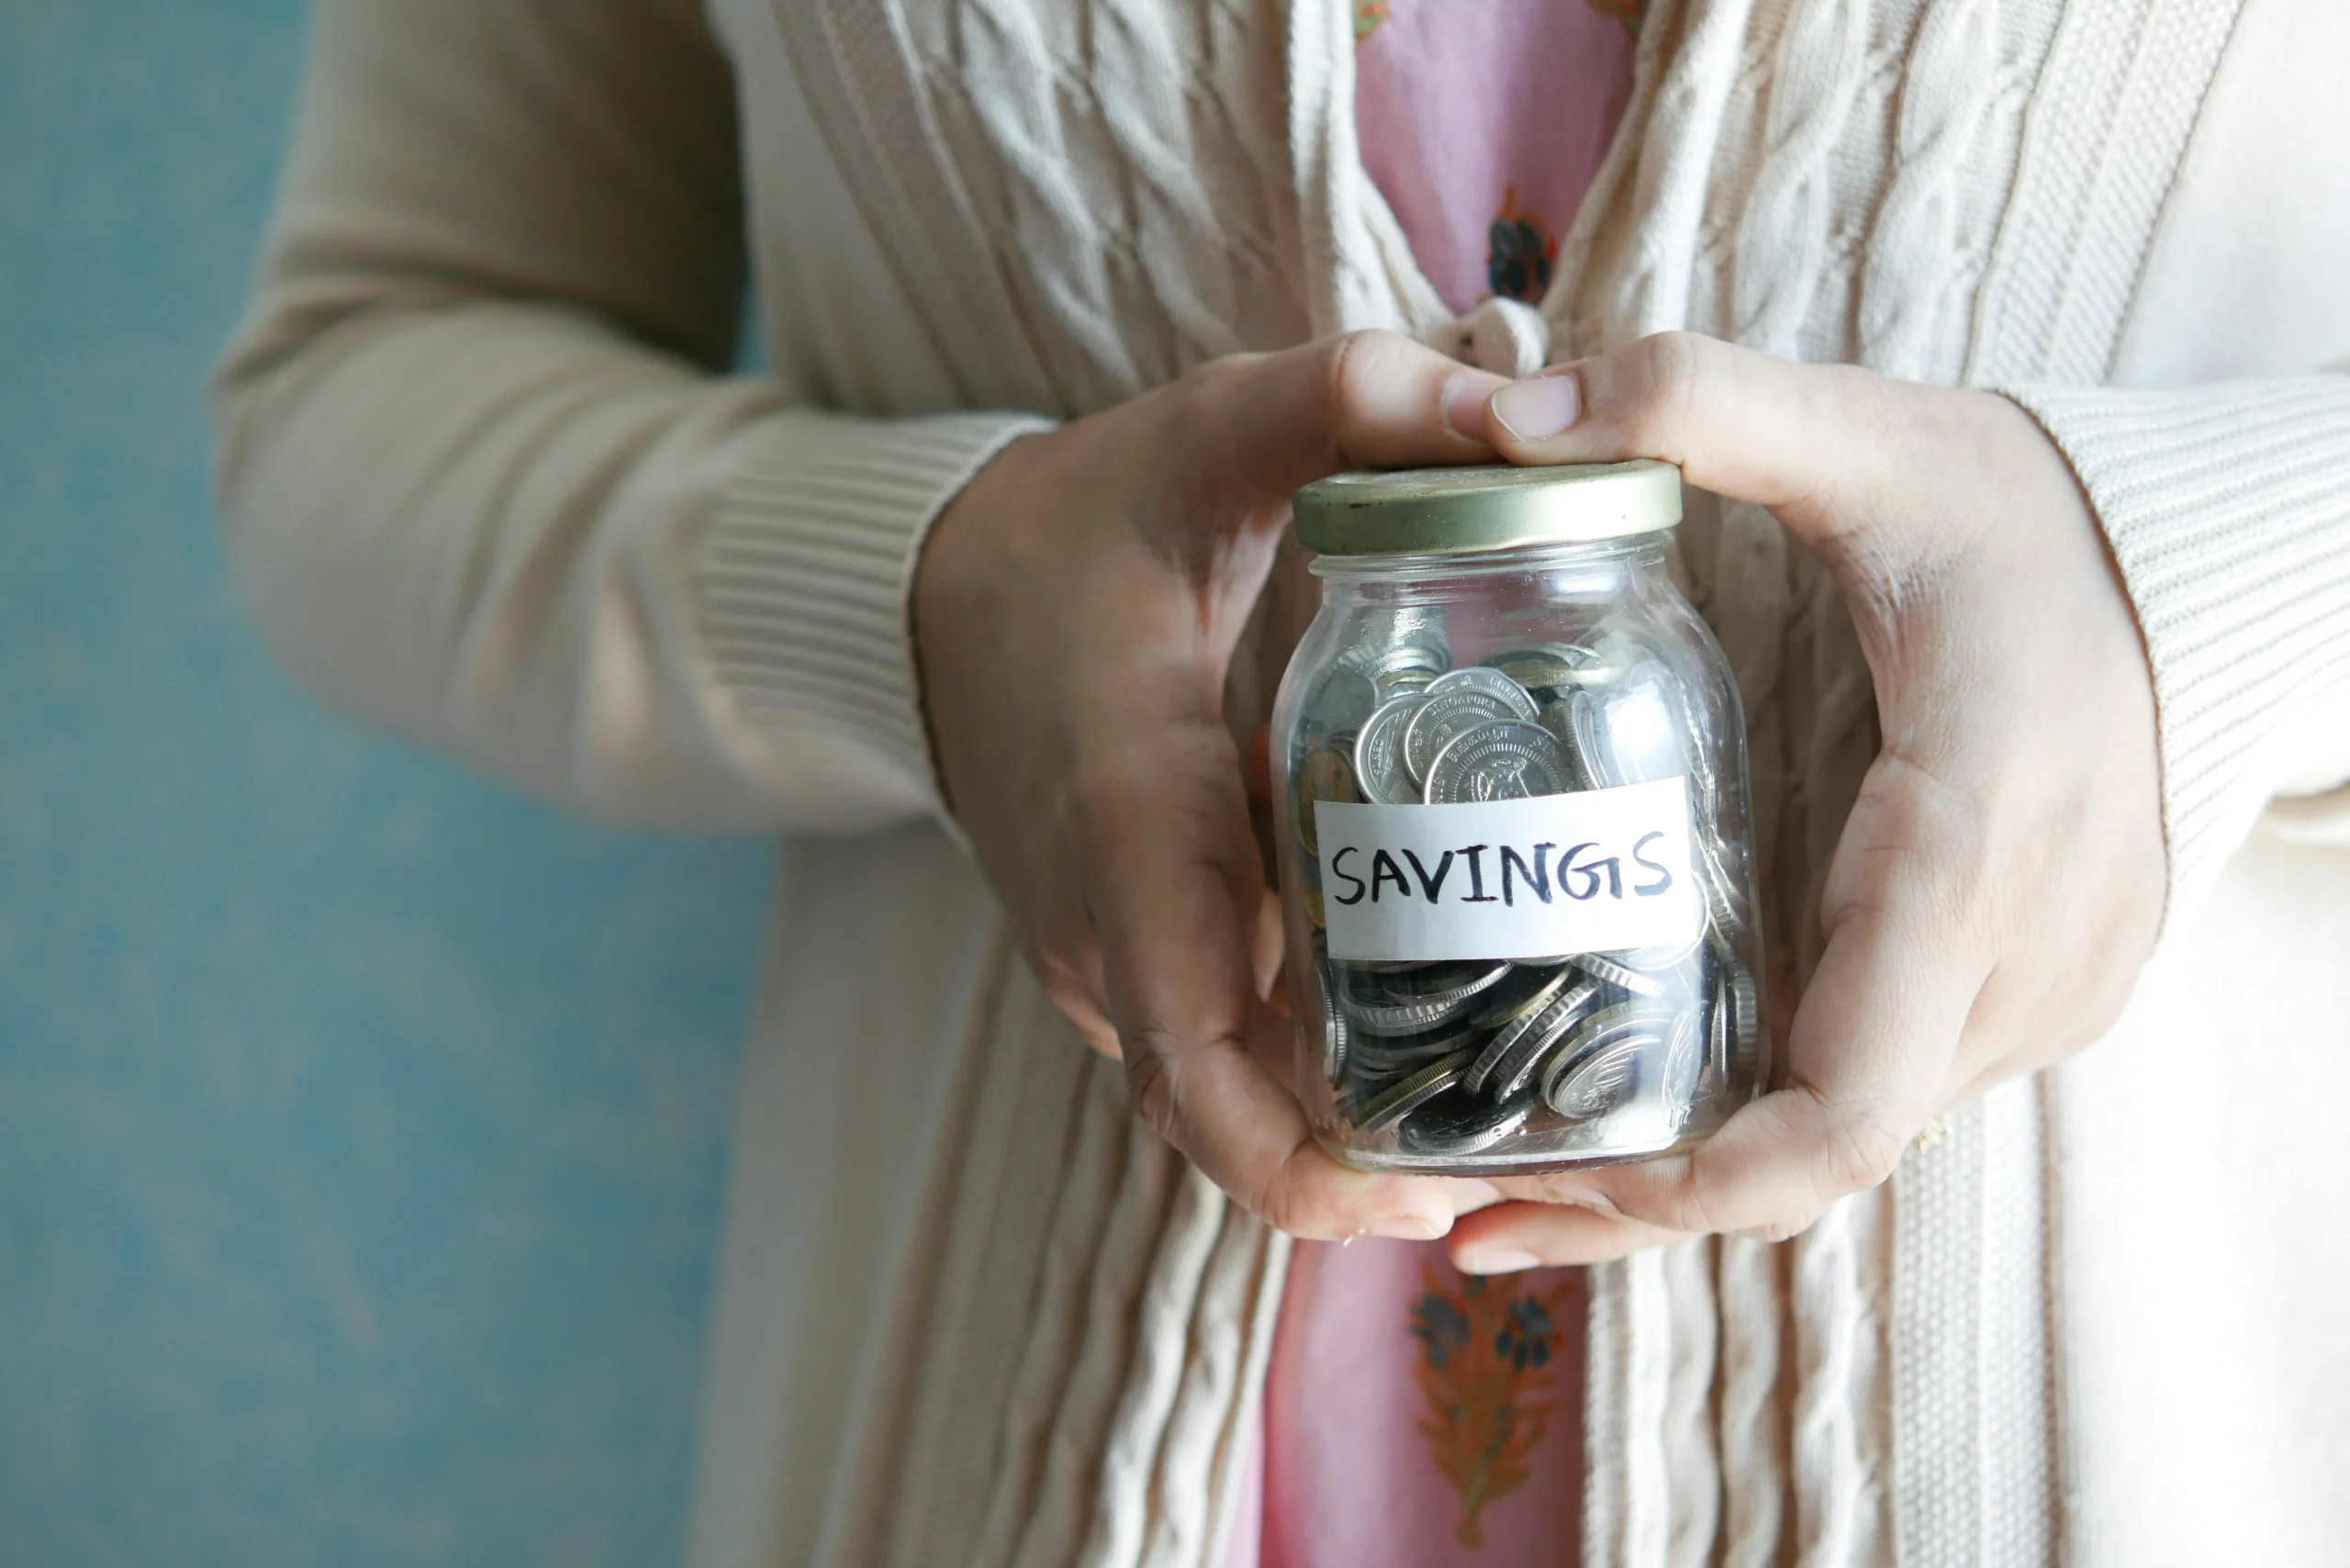 Someone is holding a jar of coins that says savings on it. They may benefit from having a budget bookkeeper.